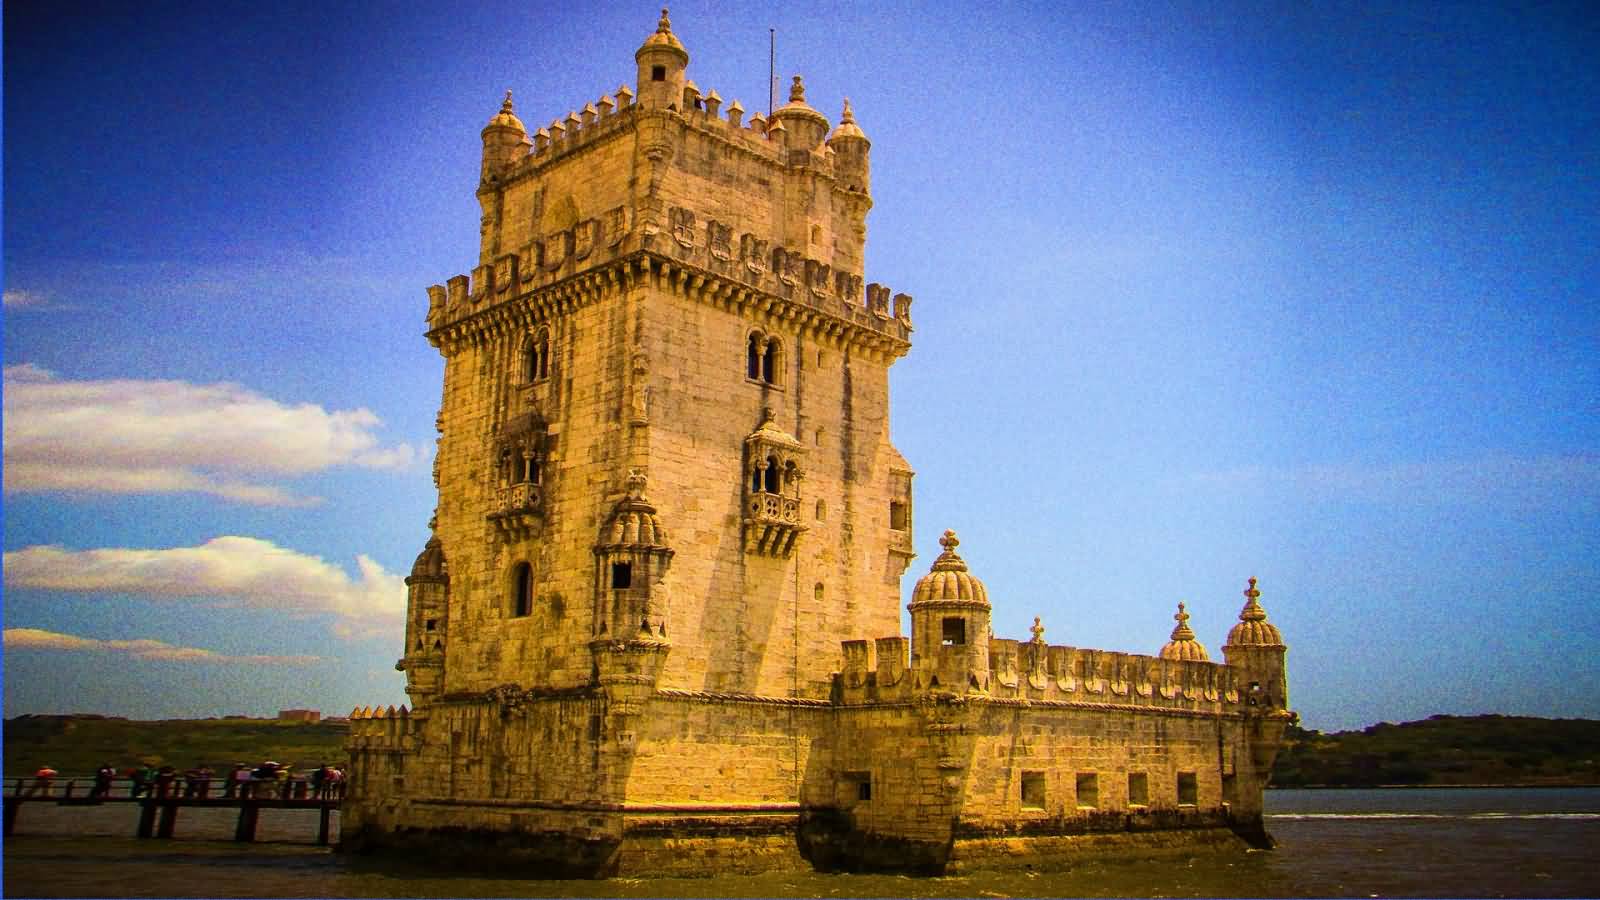 Sunset View Of Belem Tower In Portugal